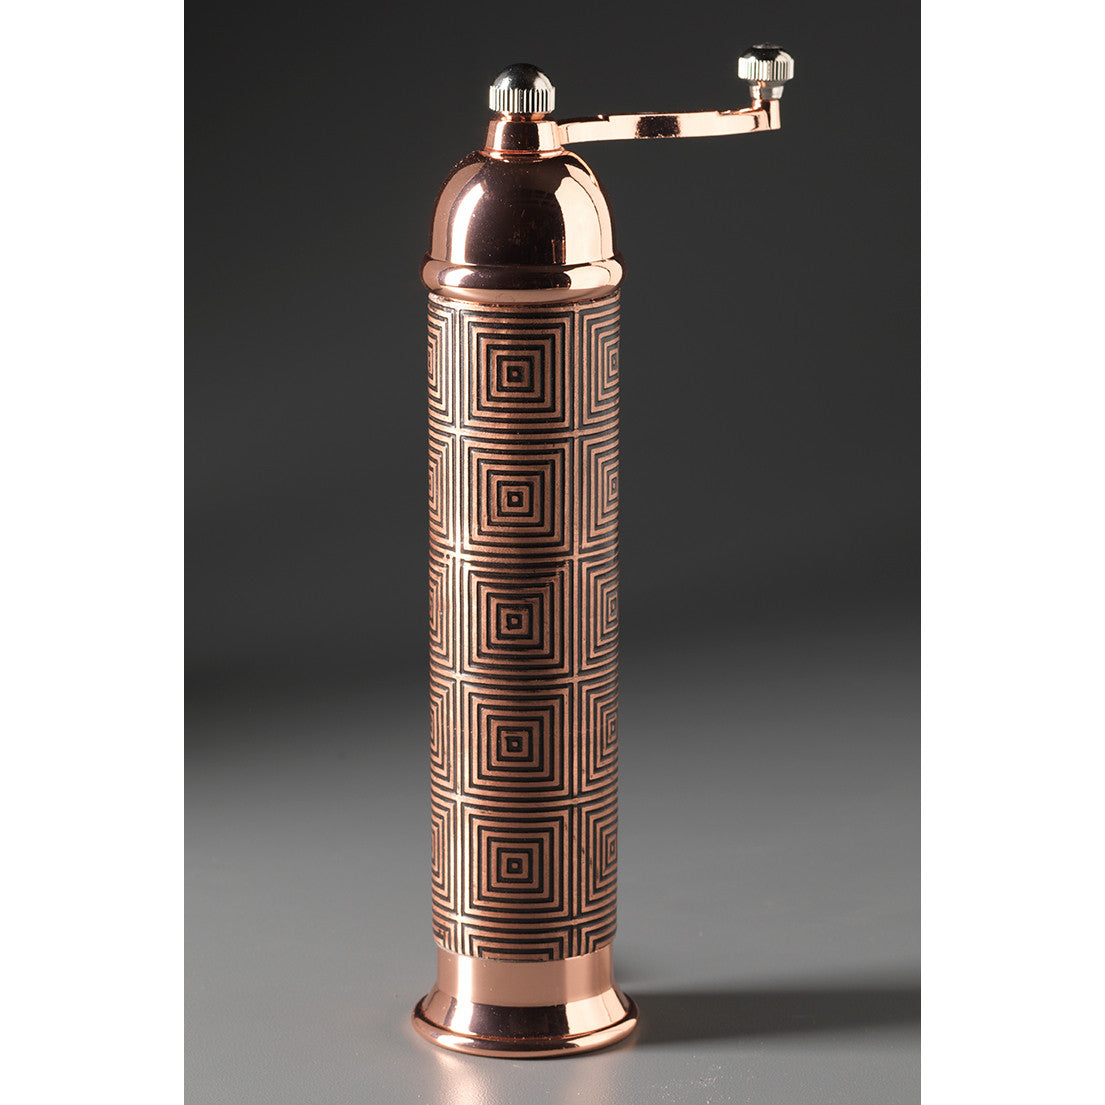 https://www.sweetheartgallery.com/cdn/shop/products/Raw-Design-Copper-and-Black-Metal-Pepper-Mill-Grinder-Concentric-Copper--by-Robert-Wilhelm-Artistic-Designer-Salt-and-Pepper-Shakers.jpeg?v=1591191886